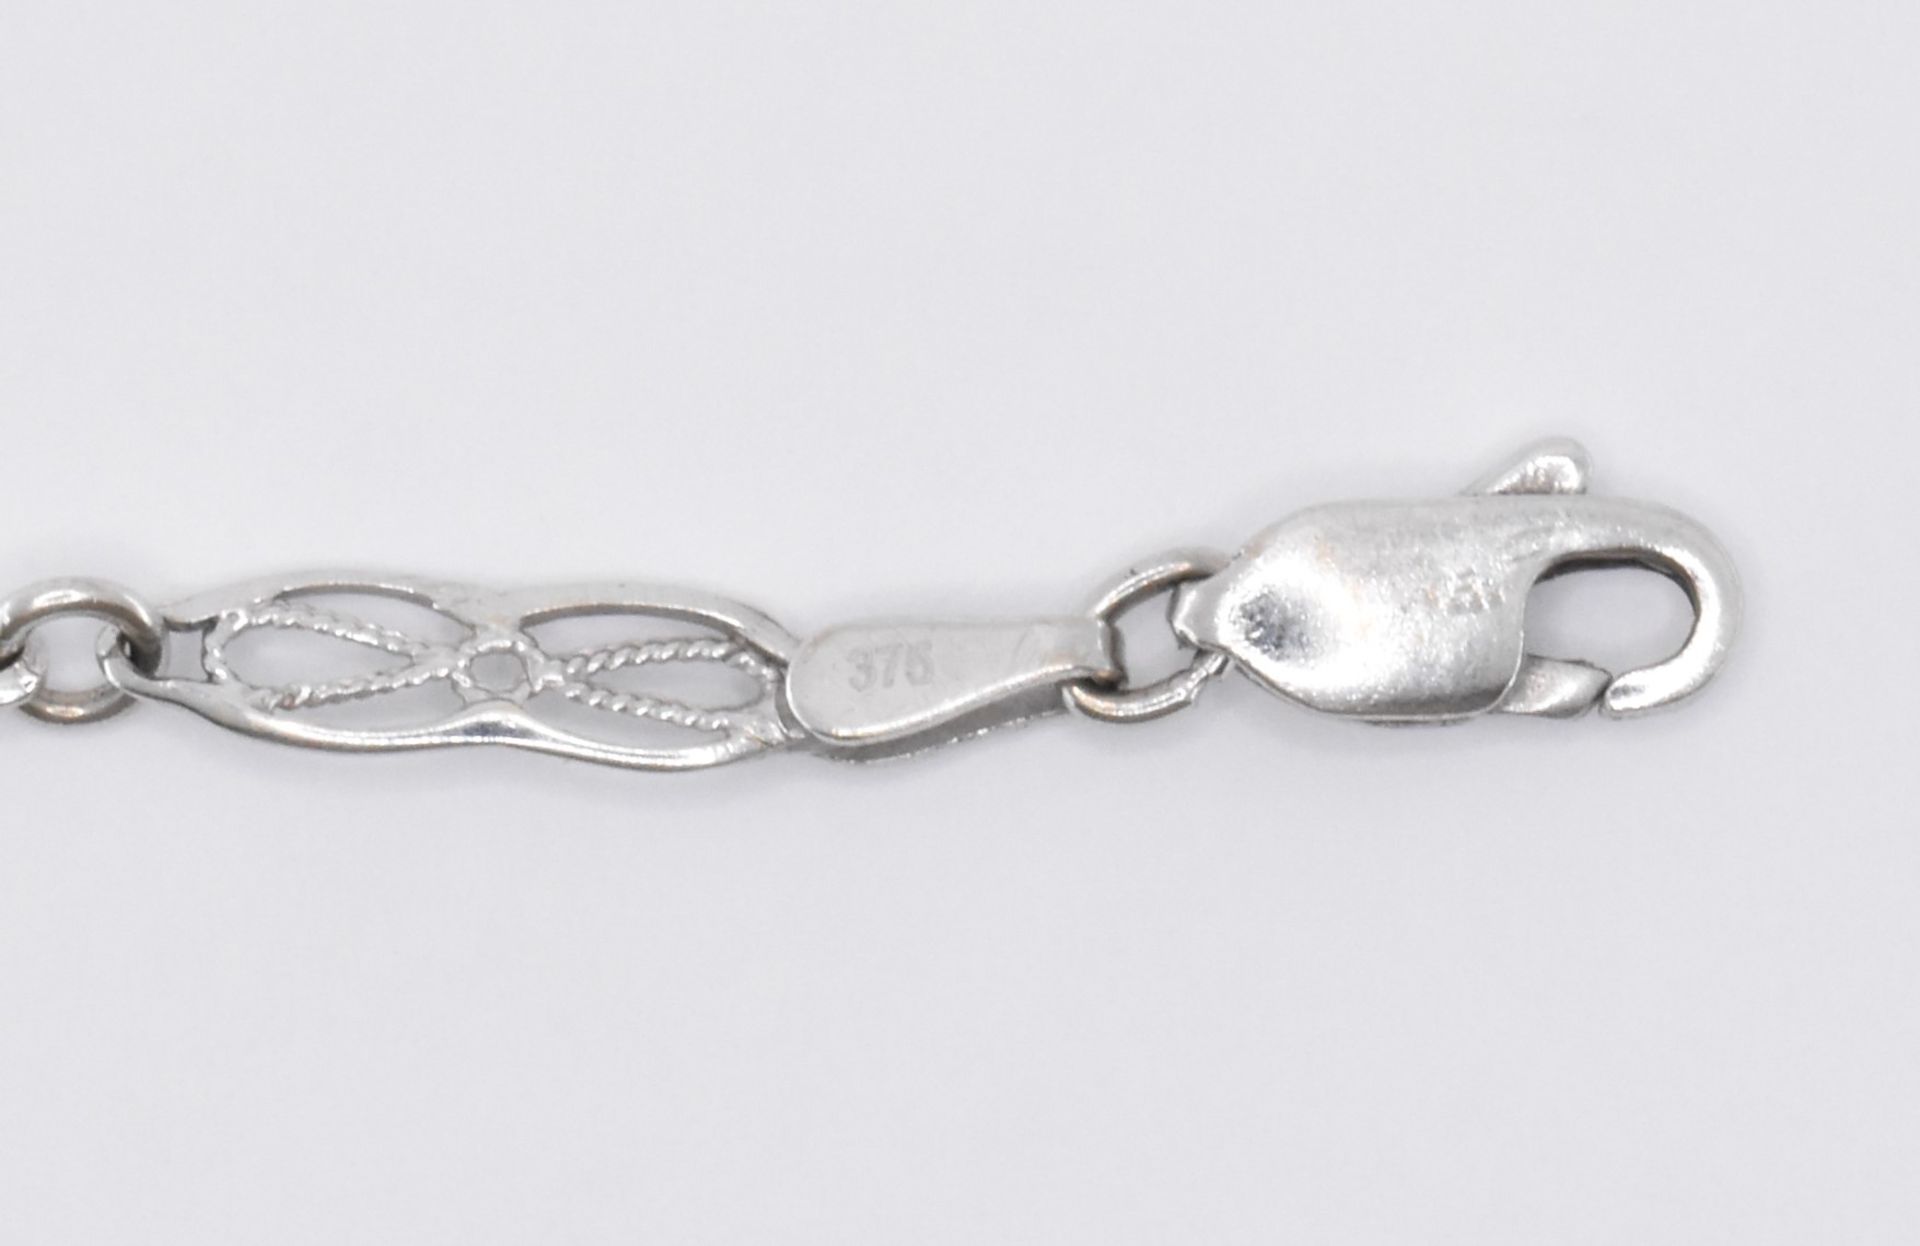 HALLMARKED 9CT WHITE GOLD FANCY LINK BRACELET CHAIN - Image 3 of 4